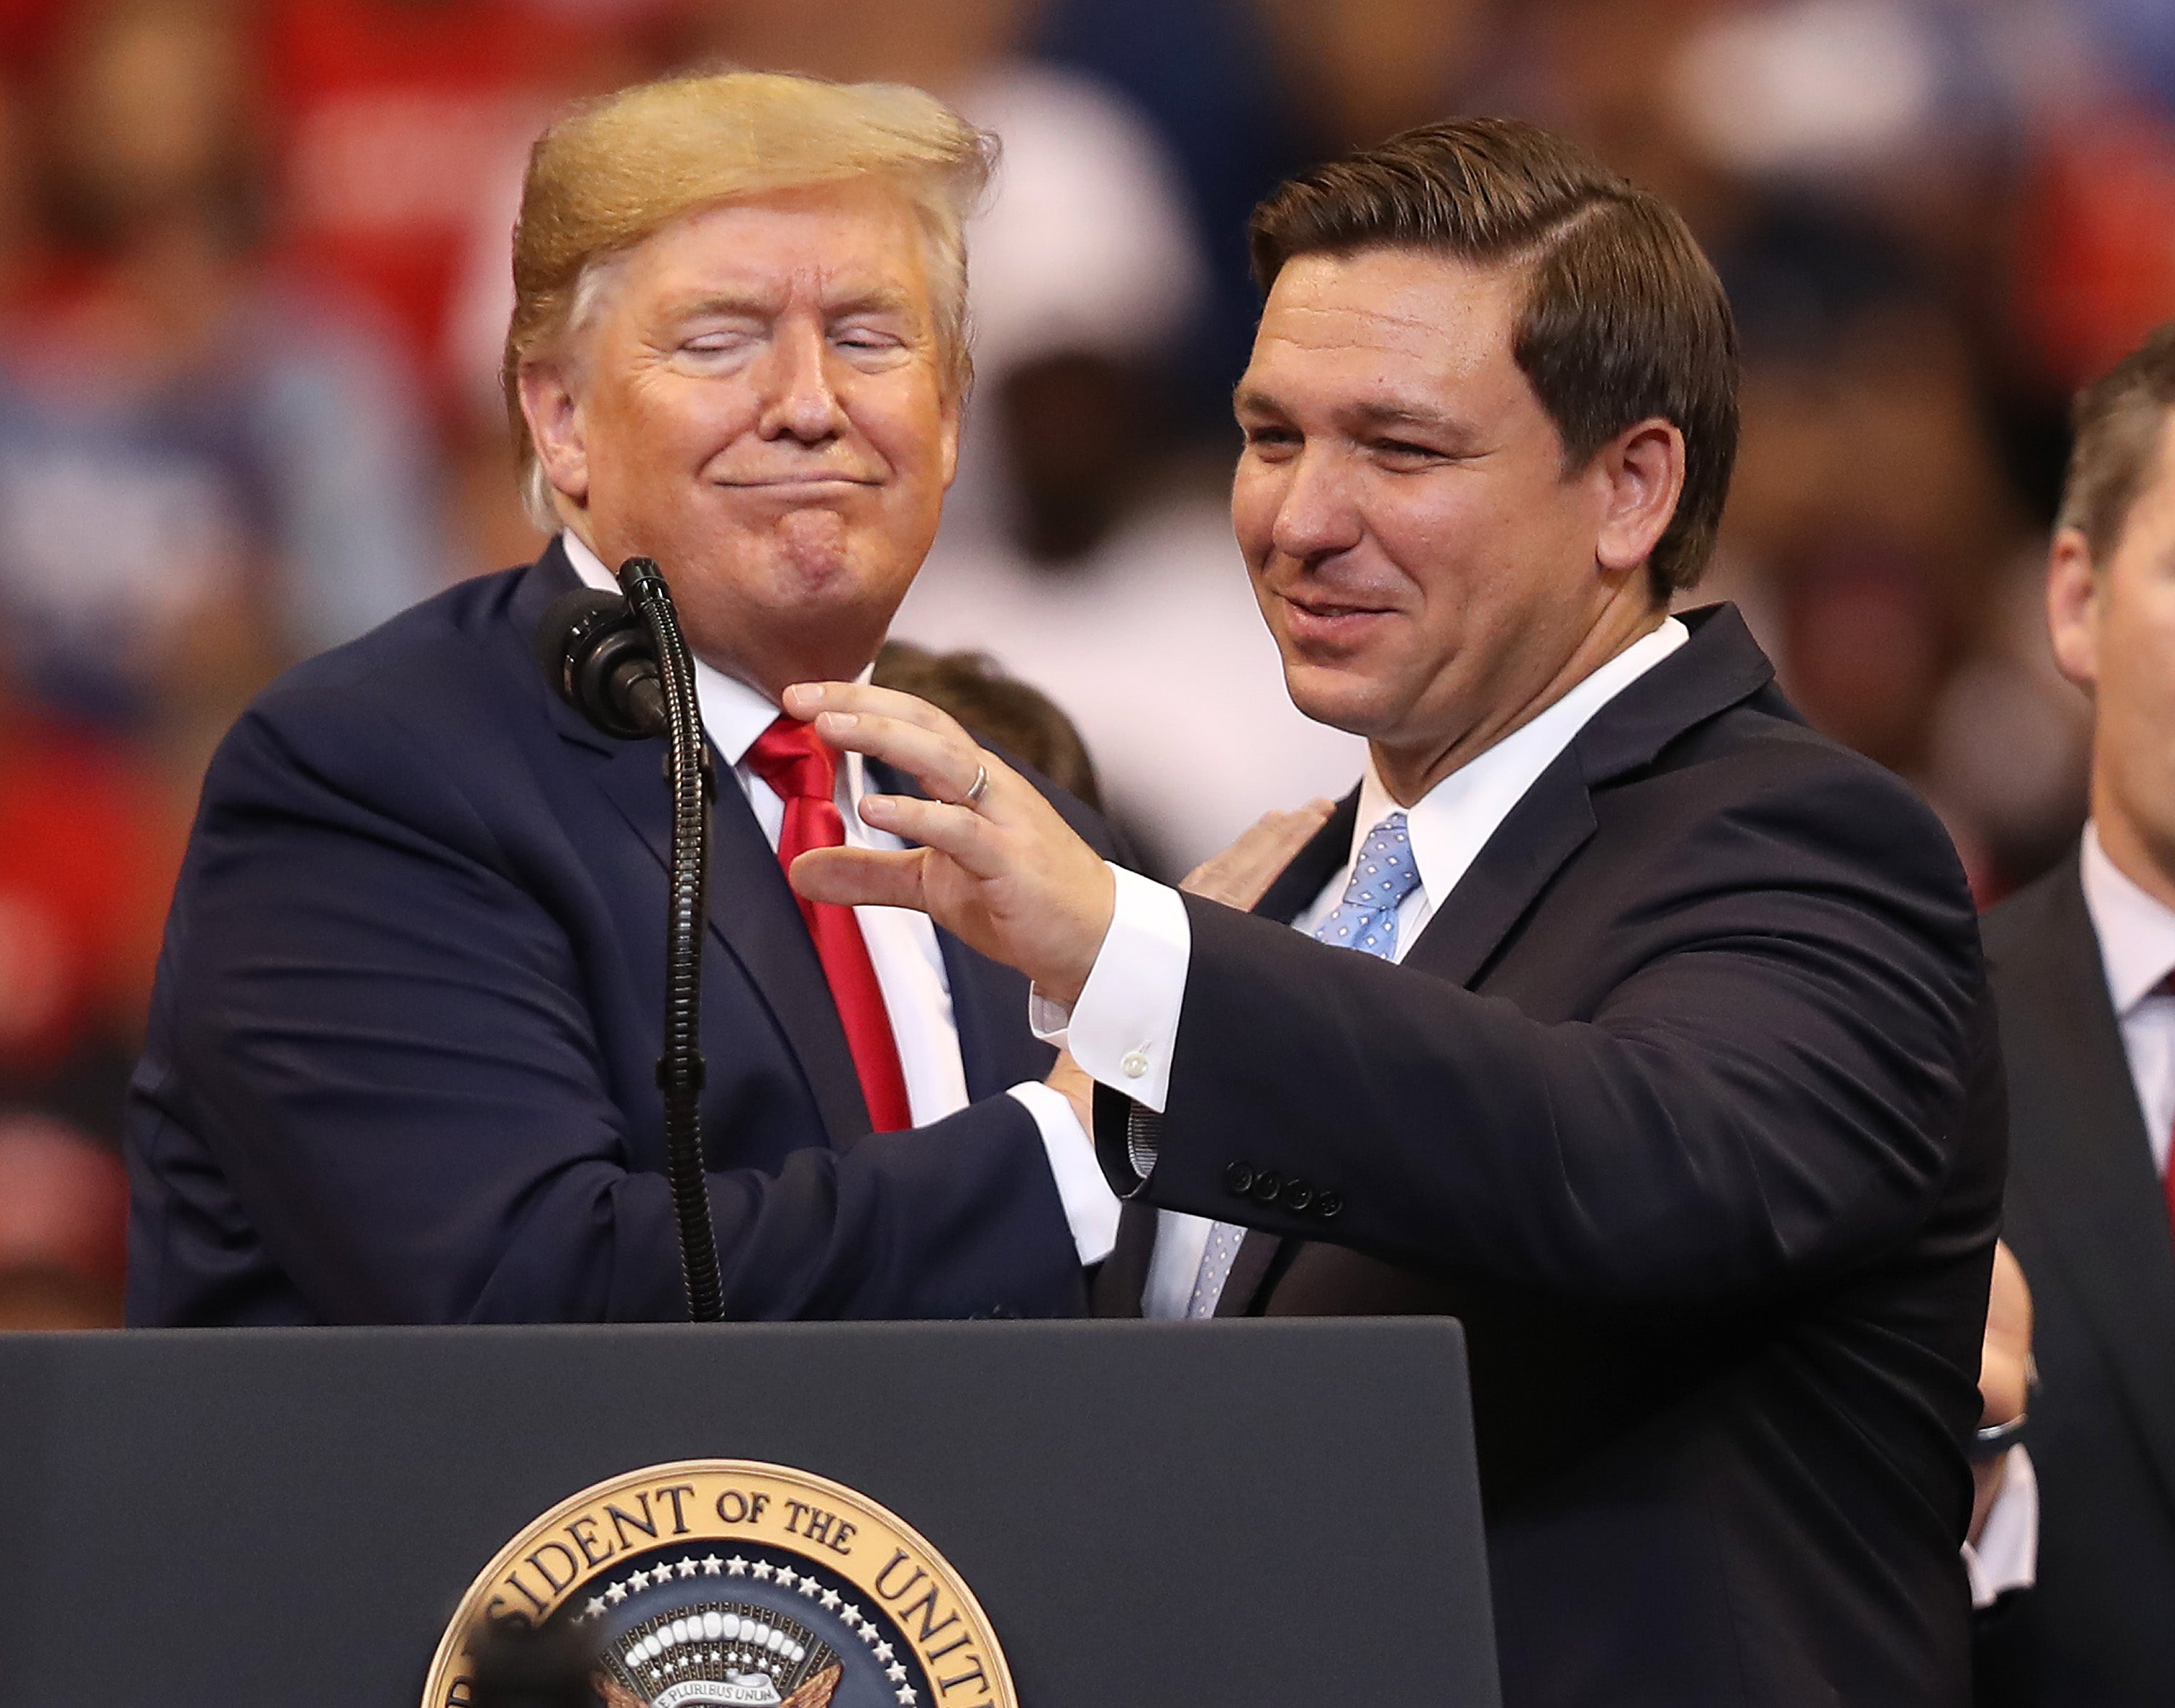 There is no longer any affection between Donald Trump and Ron DeSantis